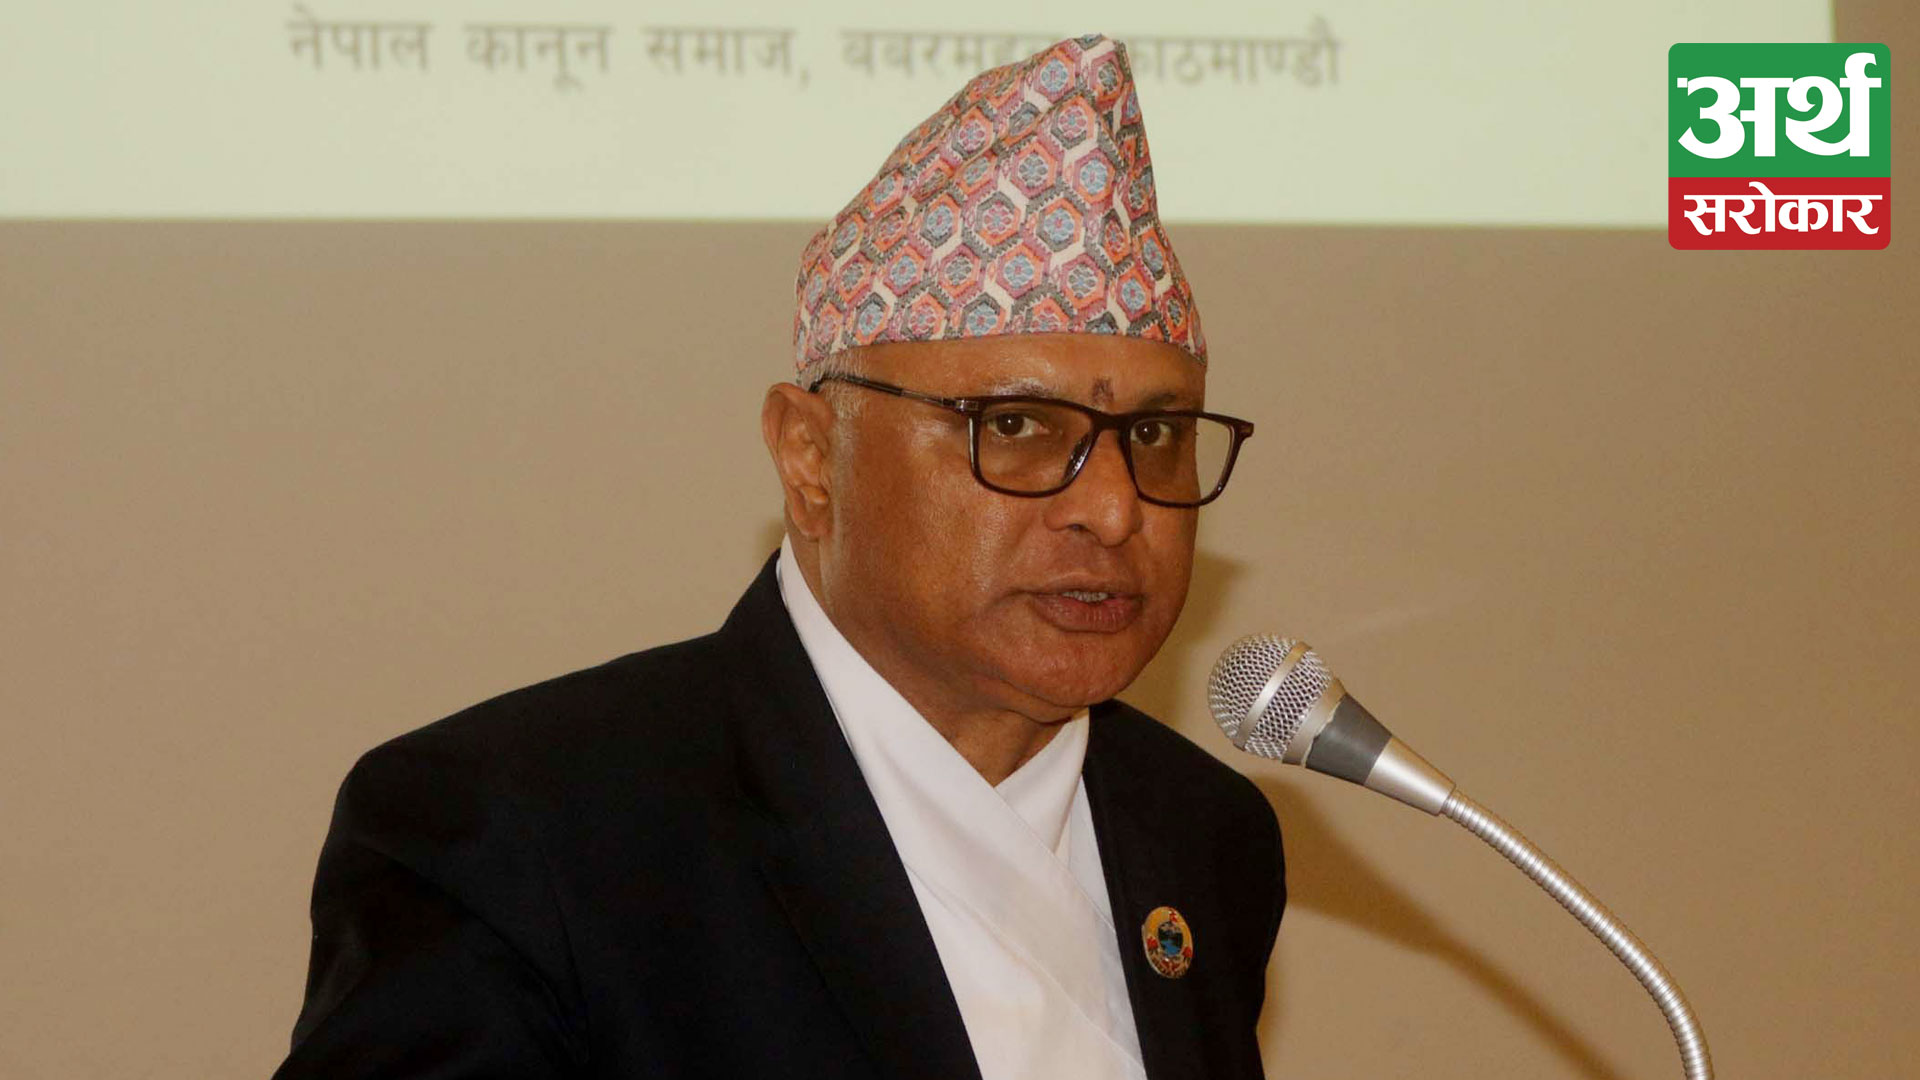 Upcoming budget session will focus on production and employment: CM Karki